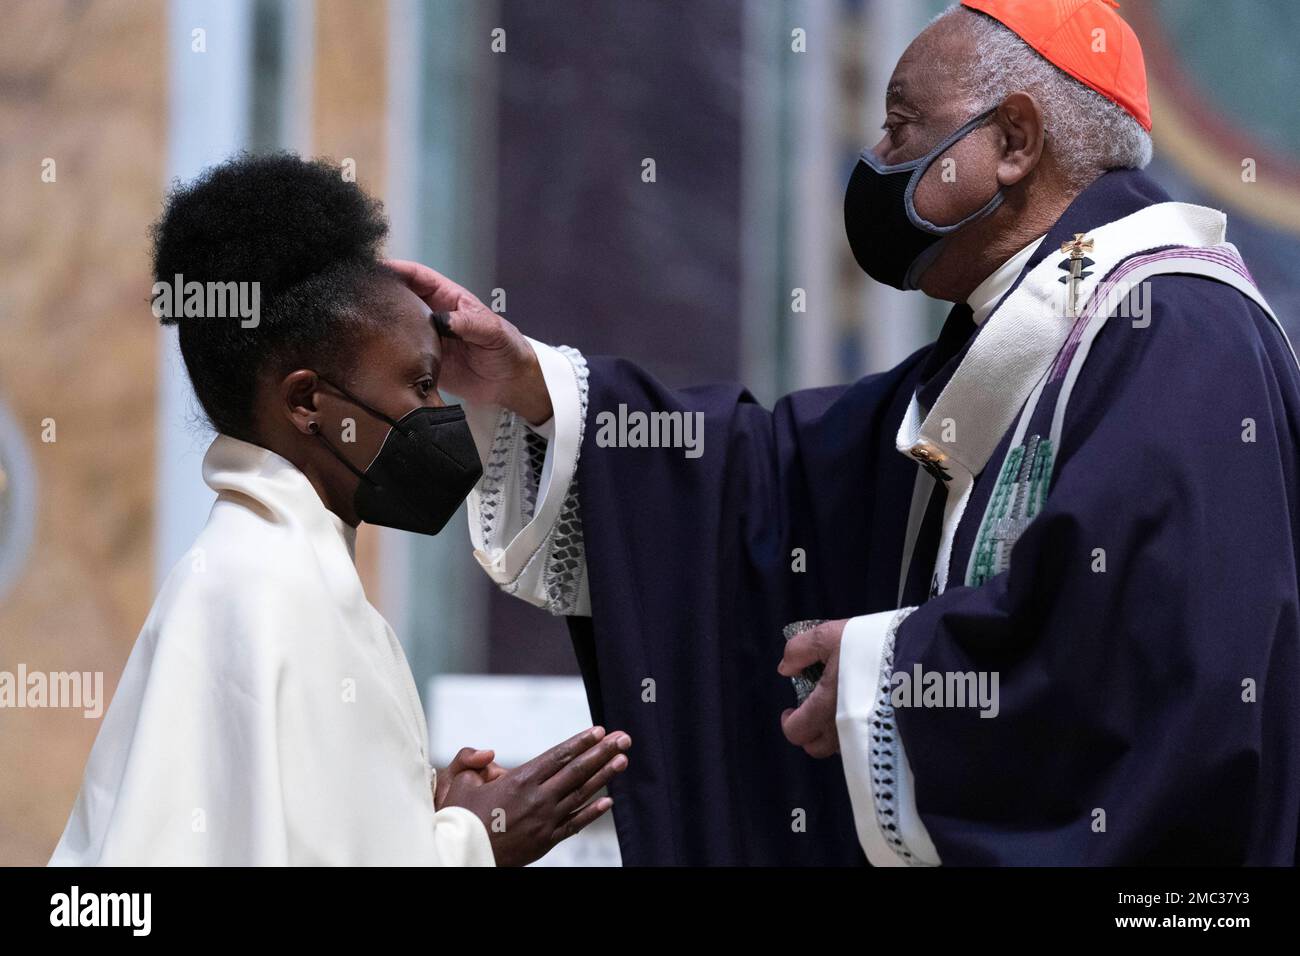 Cardinal Wilton Gregory, Archbishop of Washington places ashes on the  forehead of parishioners duringthe Ash Wednesday mass which marks the  beginning of Lent at Saint Matthew the Apostle Cathedral in Washington,  Wednesday